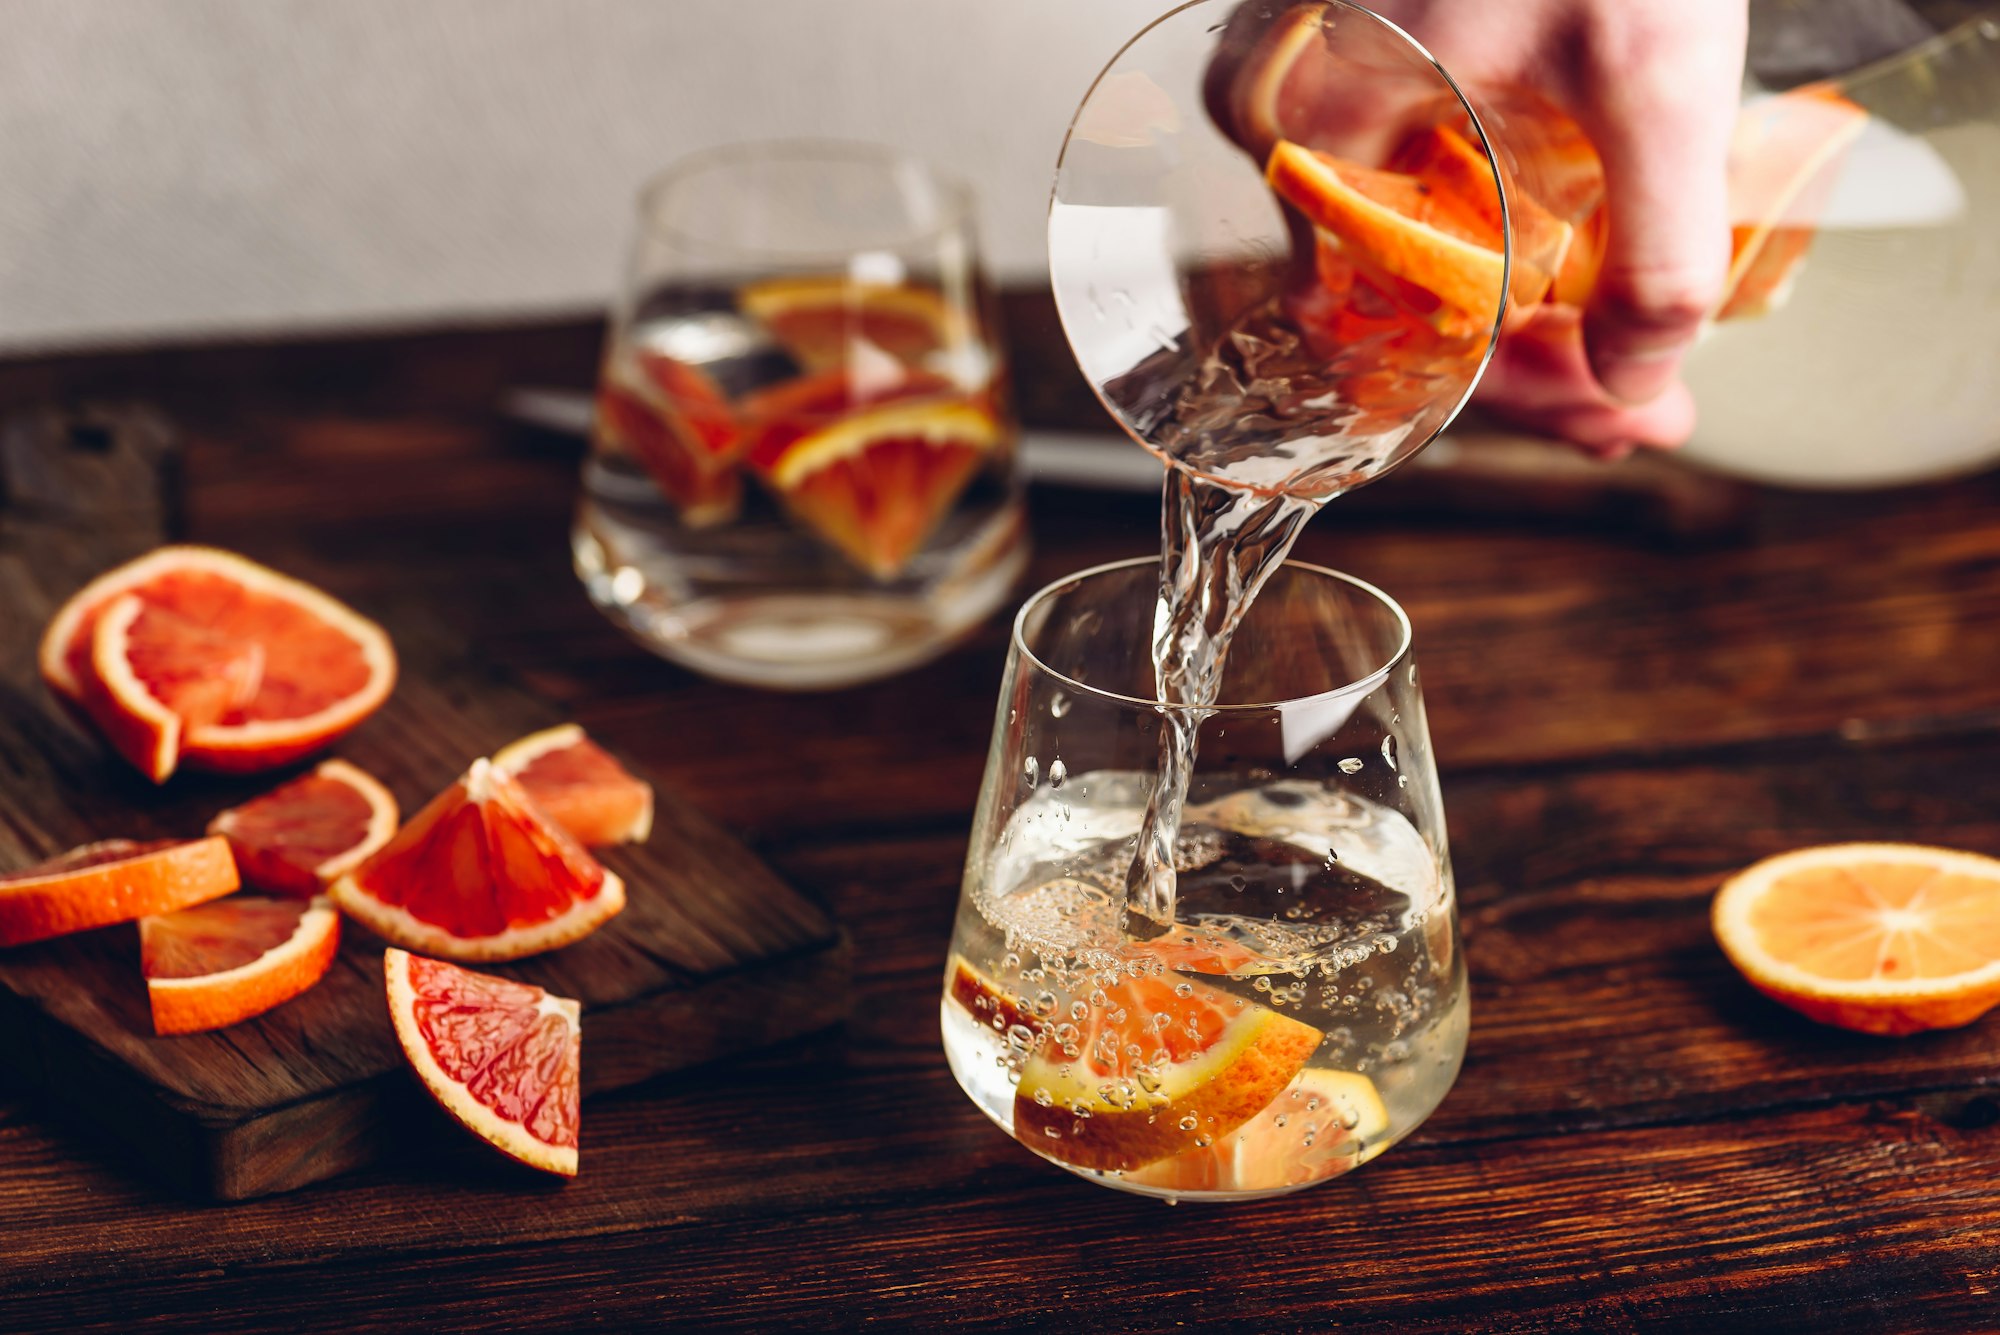 Pouring infused water with oranges into the glass